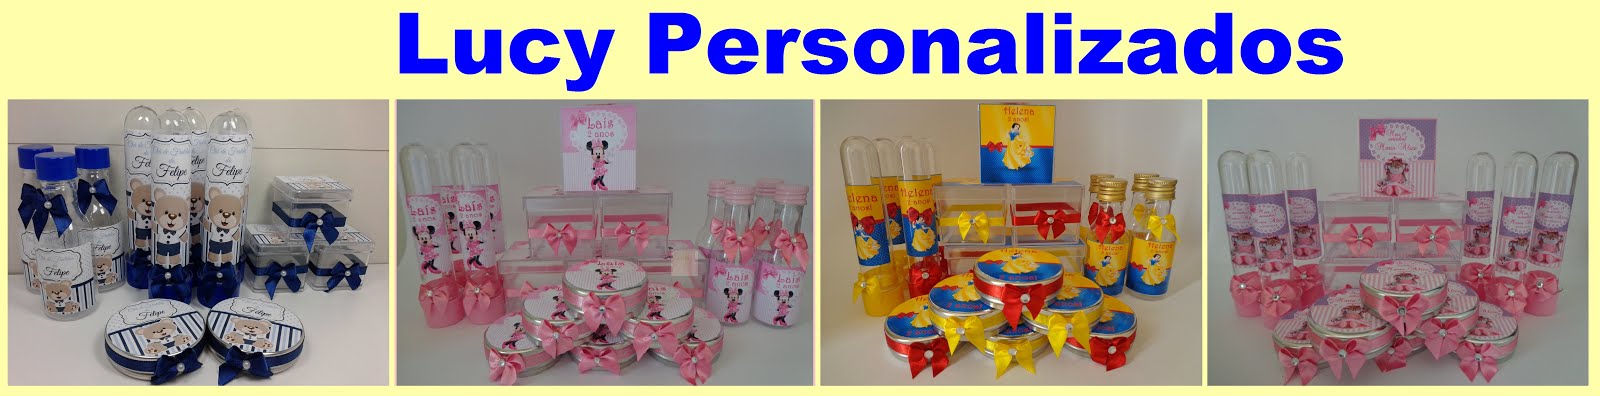 LUCY PERSONALIZADOS